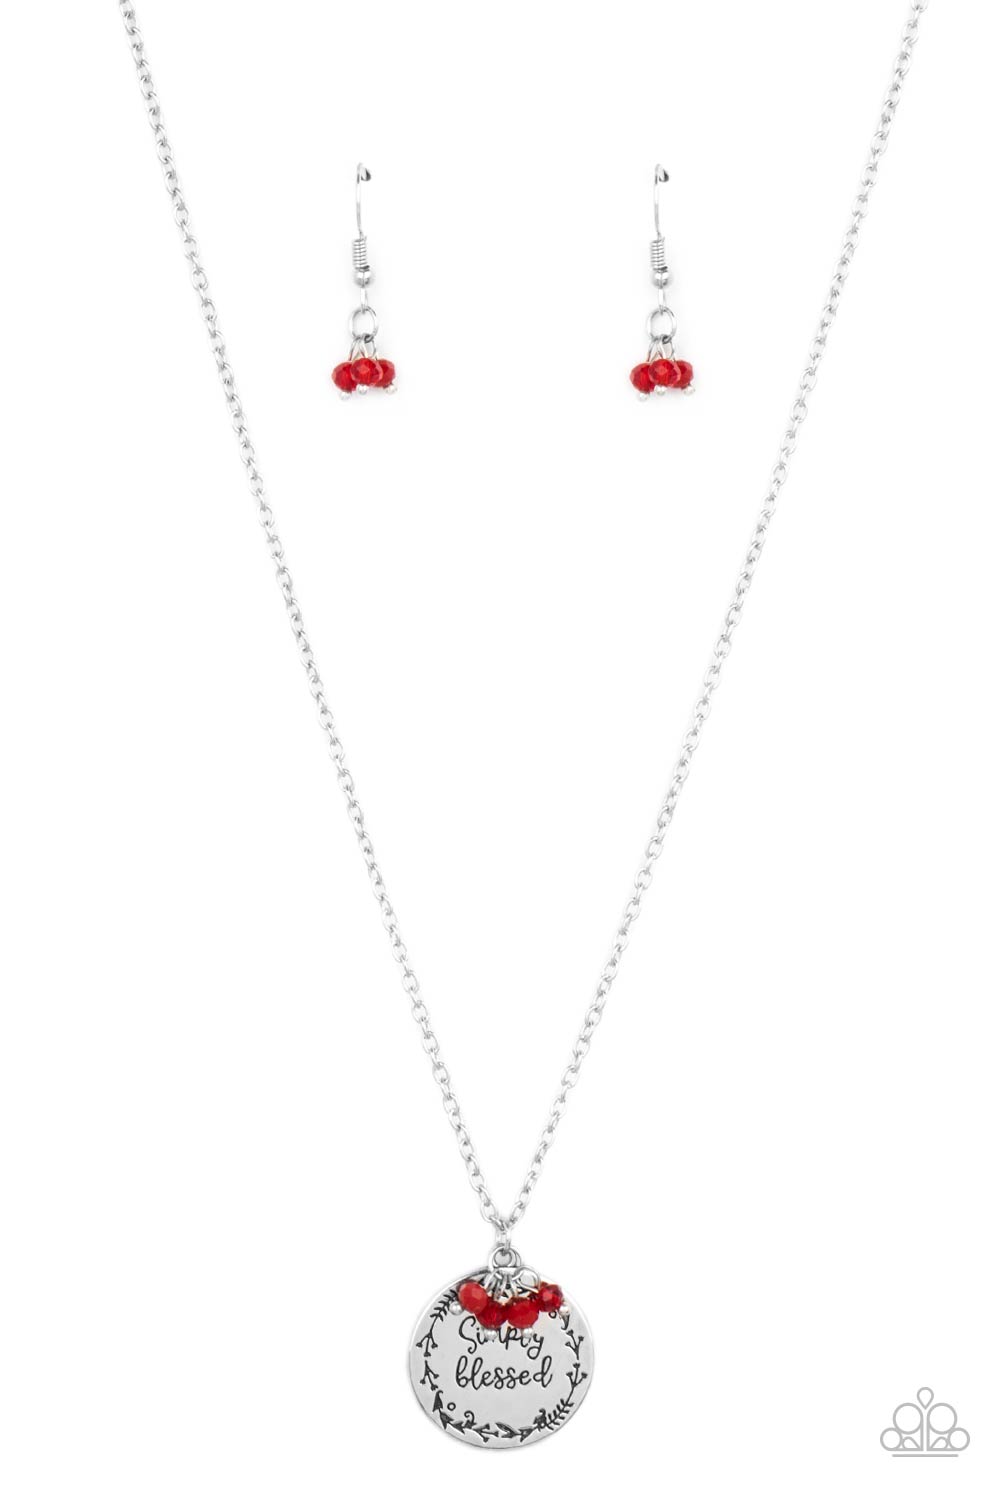 Paparazzi Necklace - Simple Blessings - Red